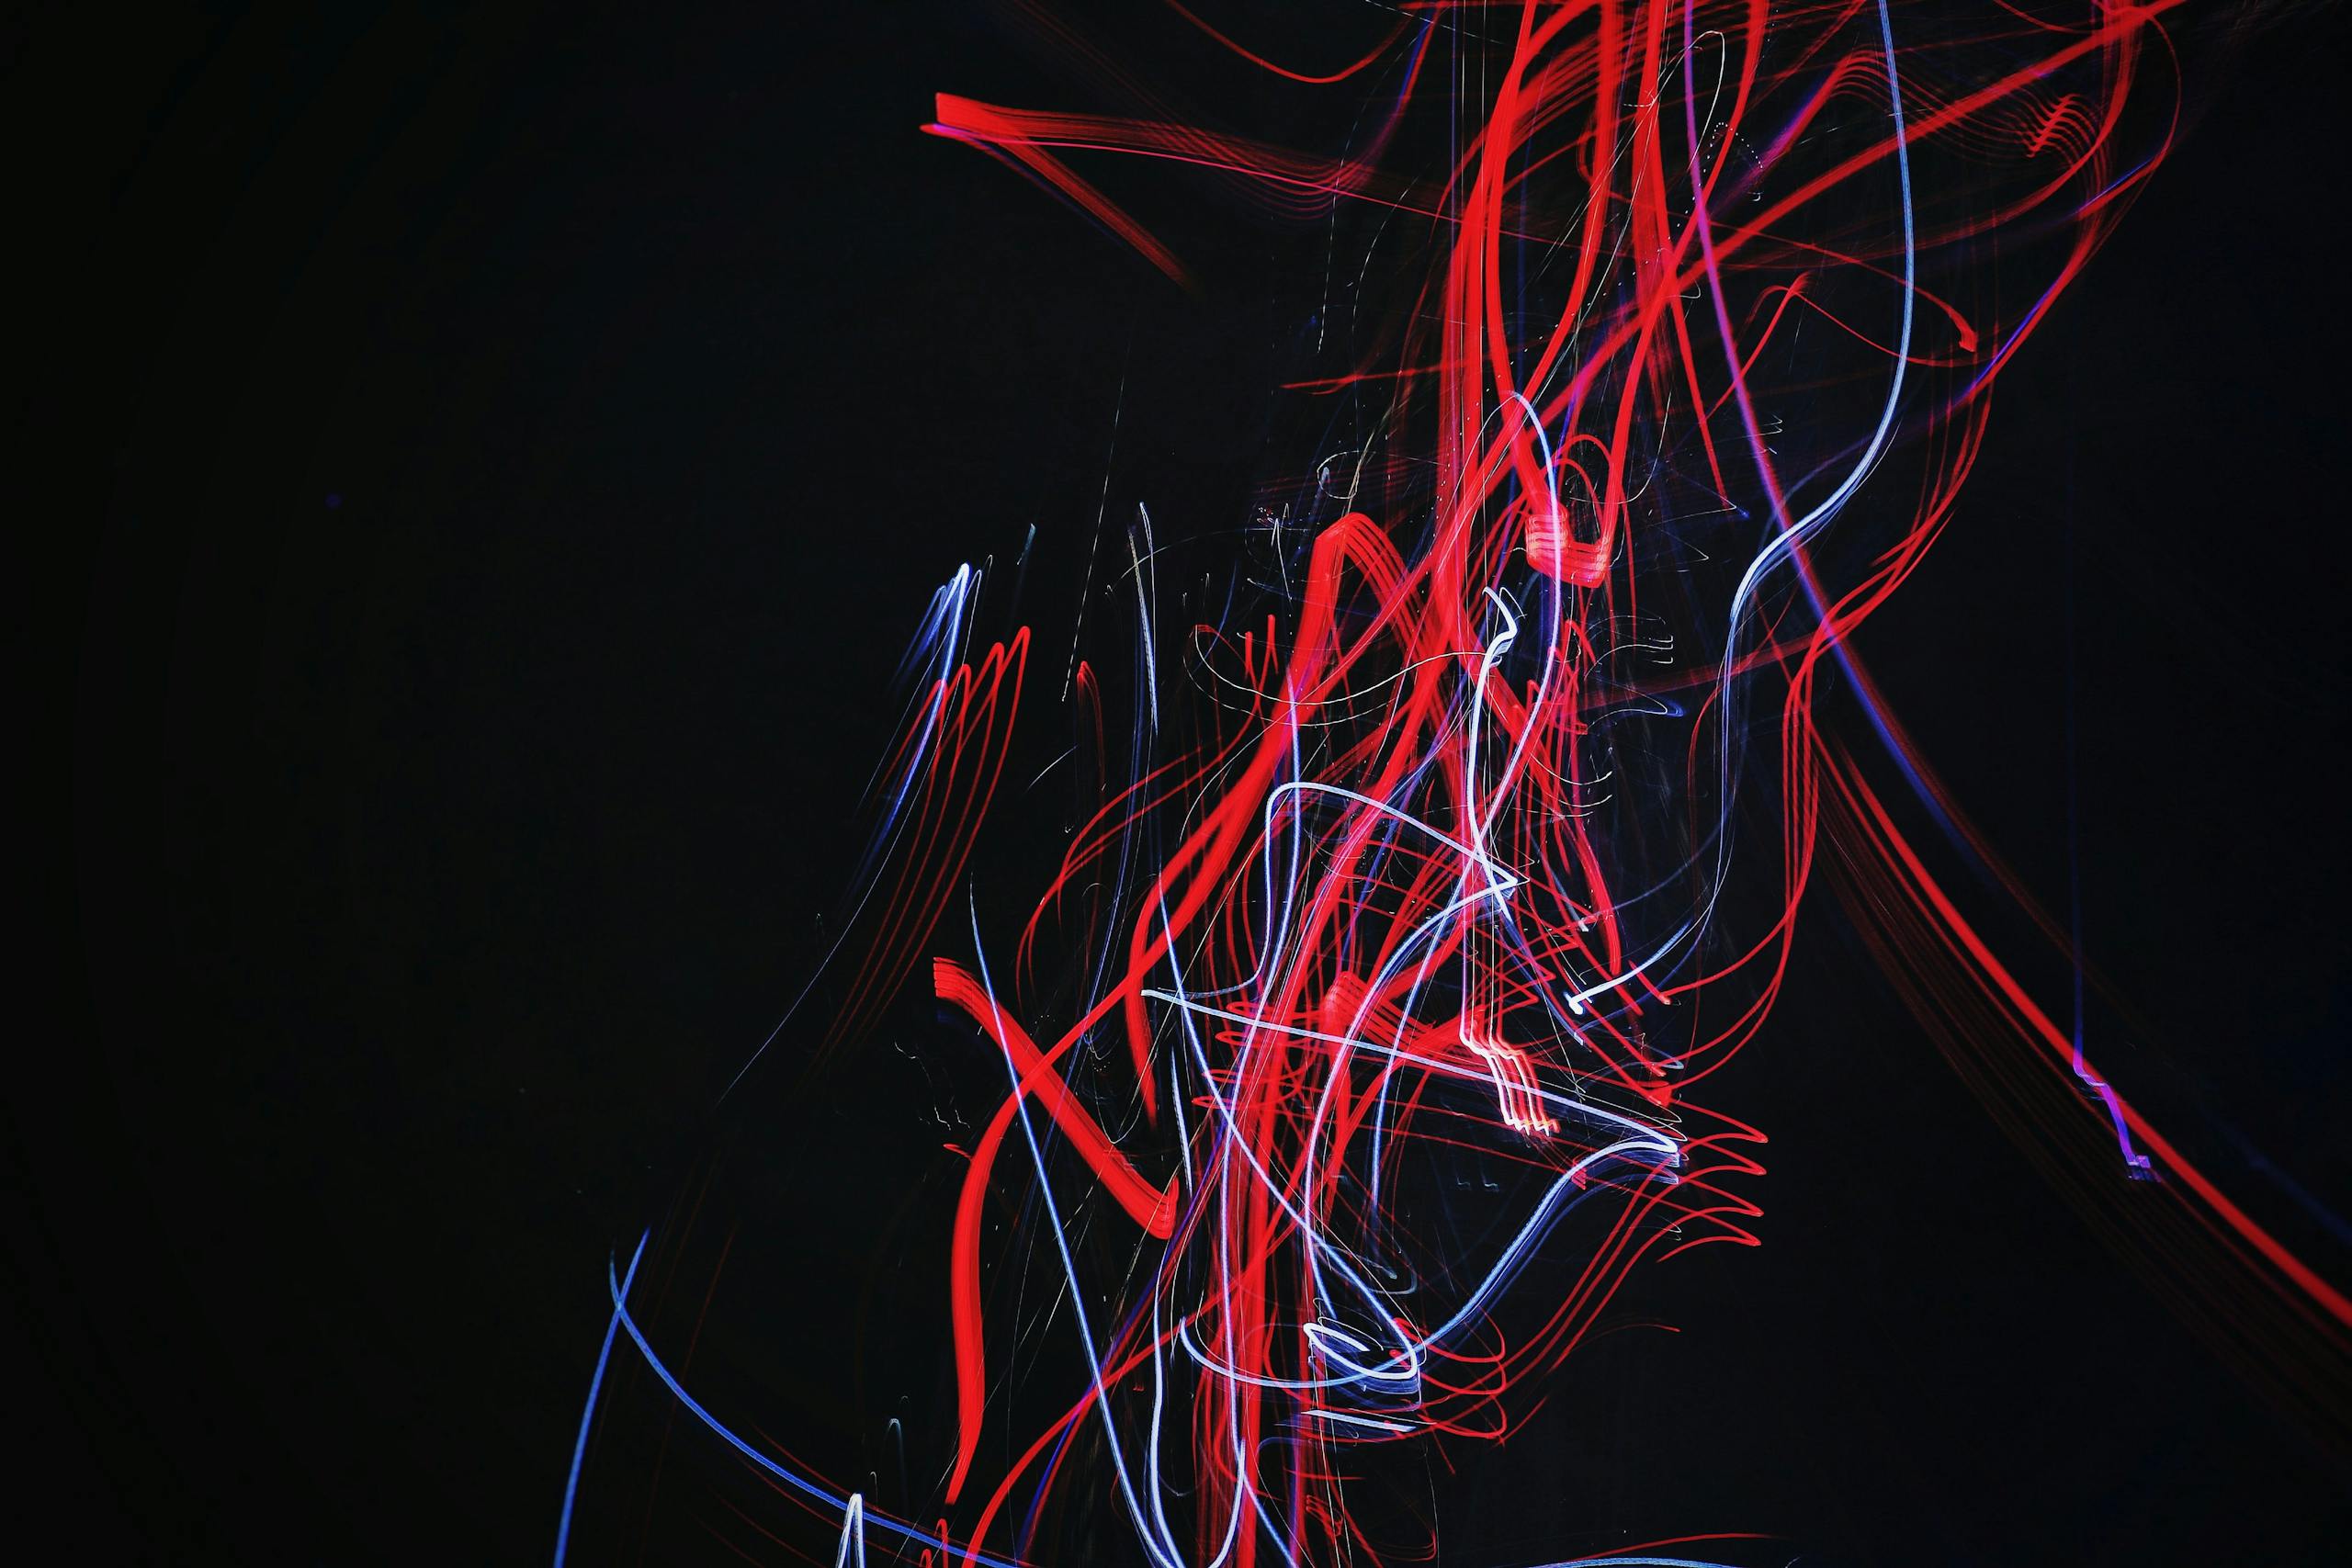 Squiggly lines of blue and red light on a dark background